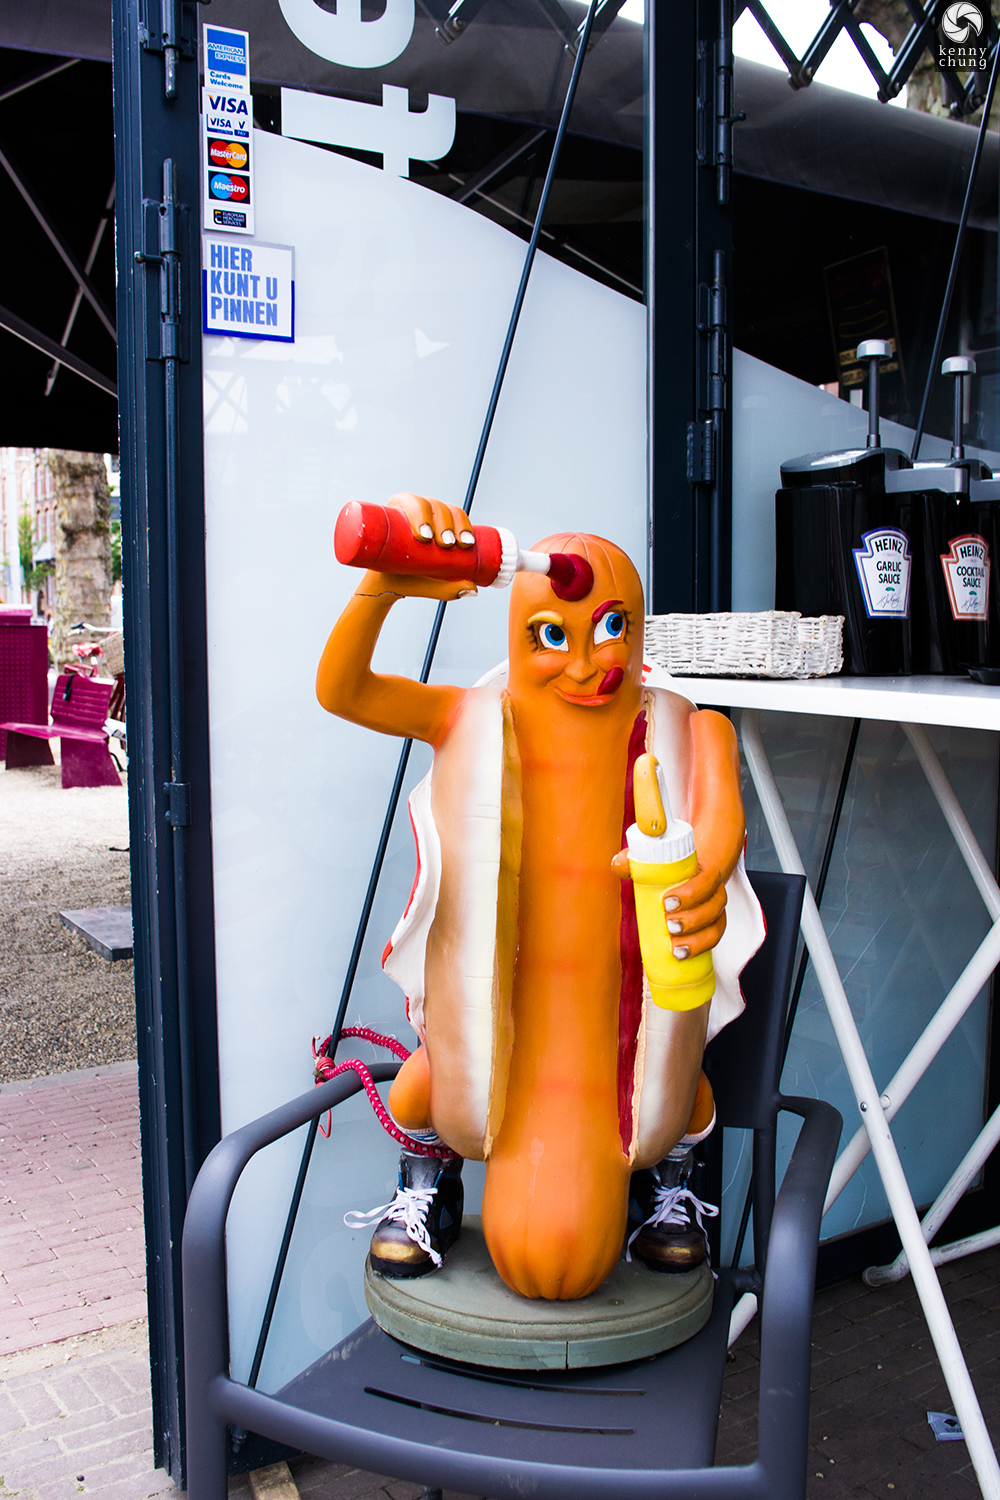 A statue of a hot dog putting sauce on himself